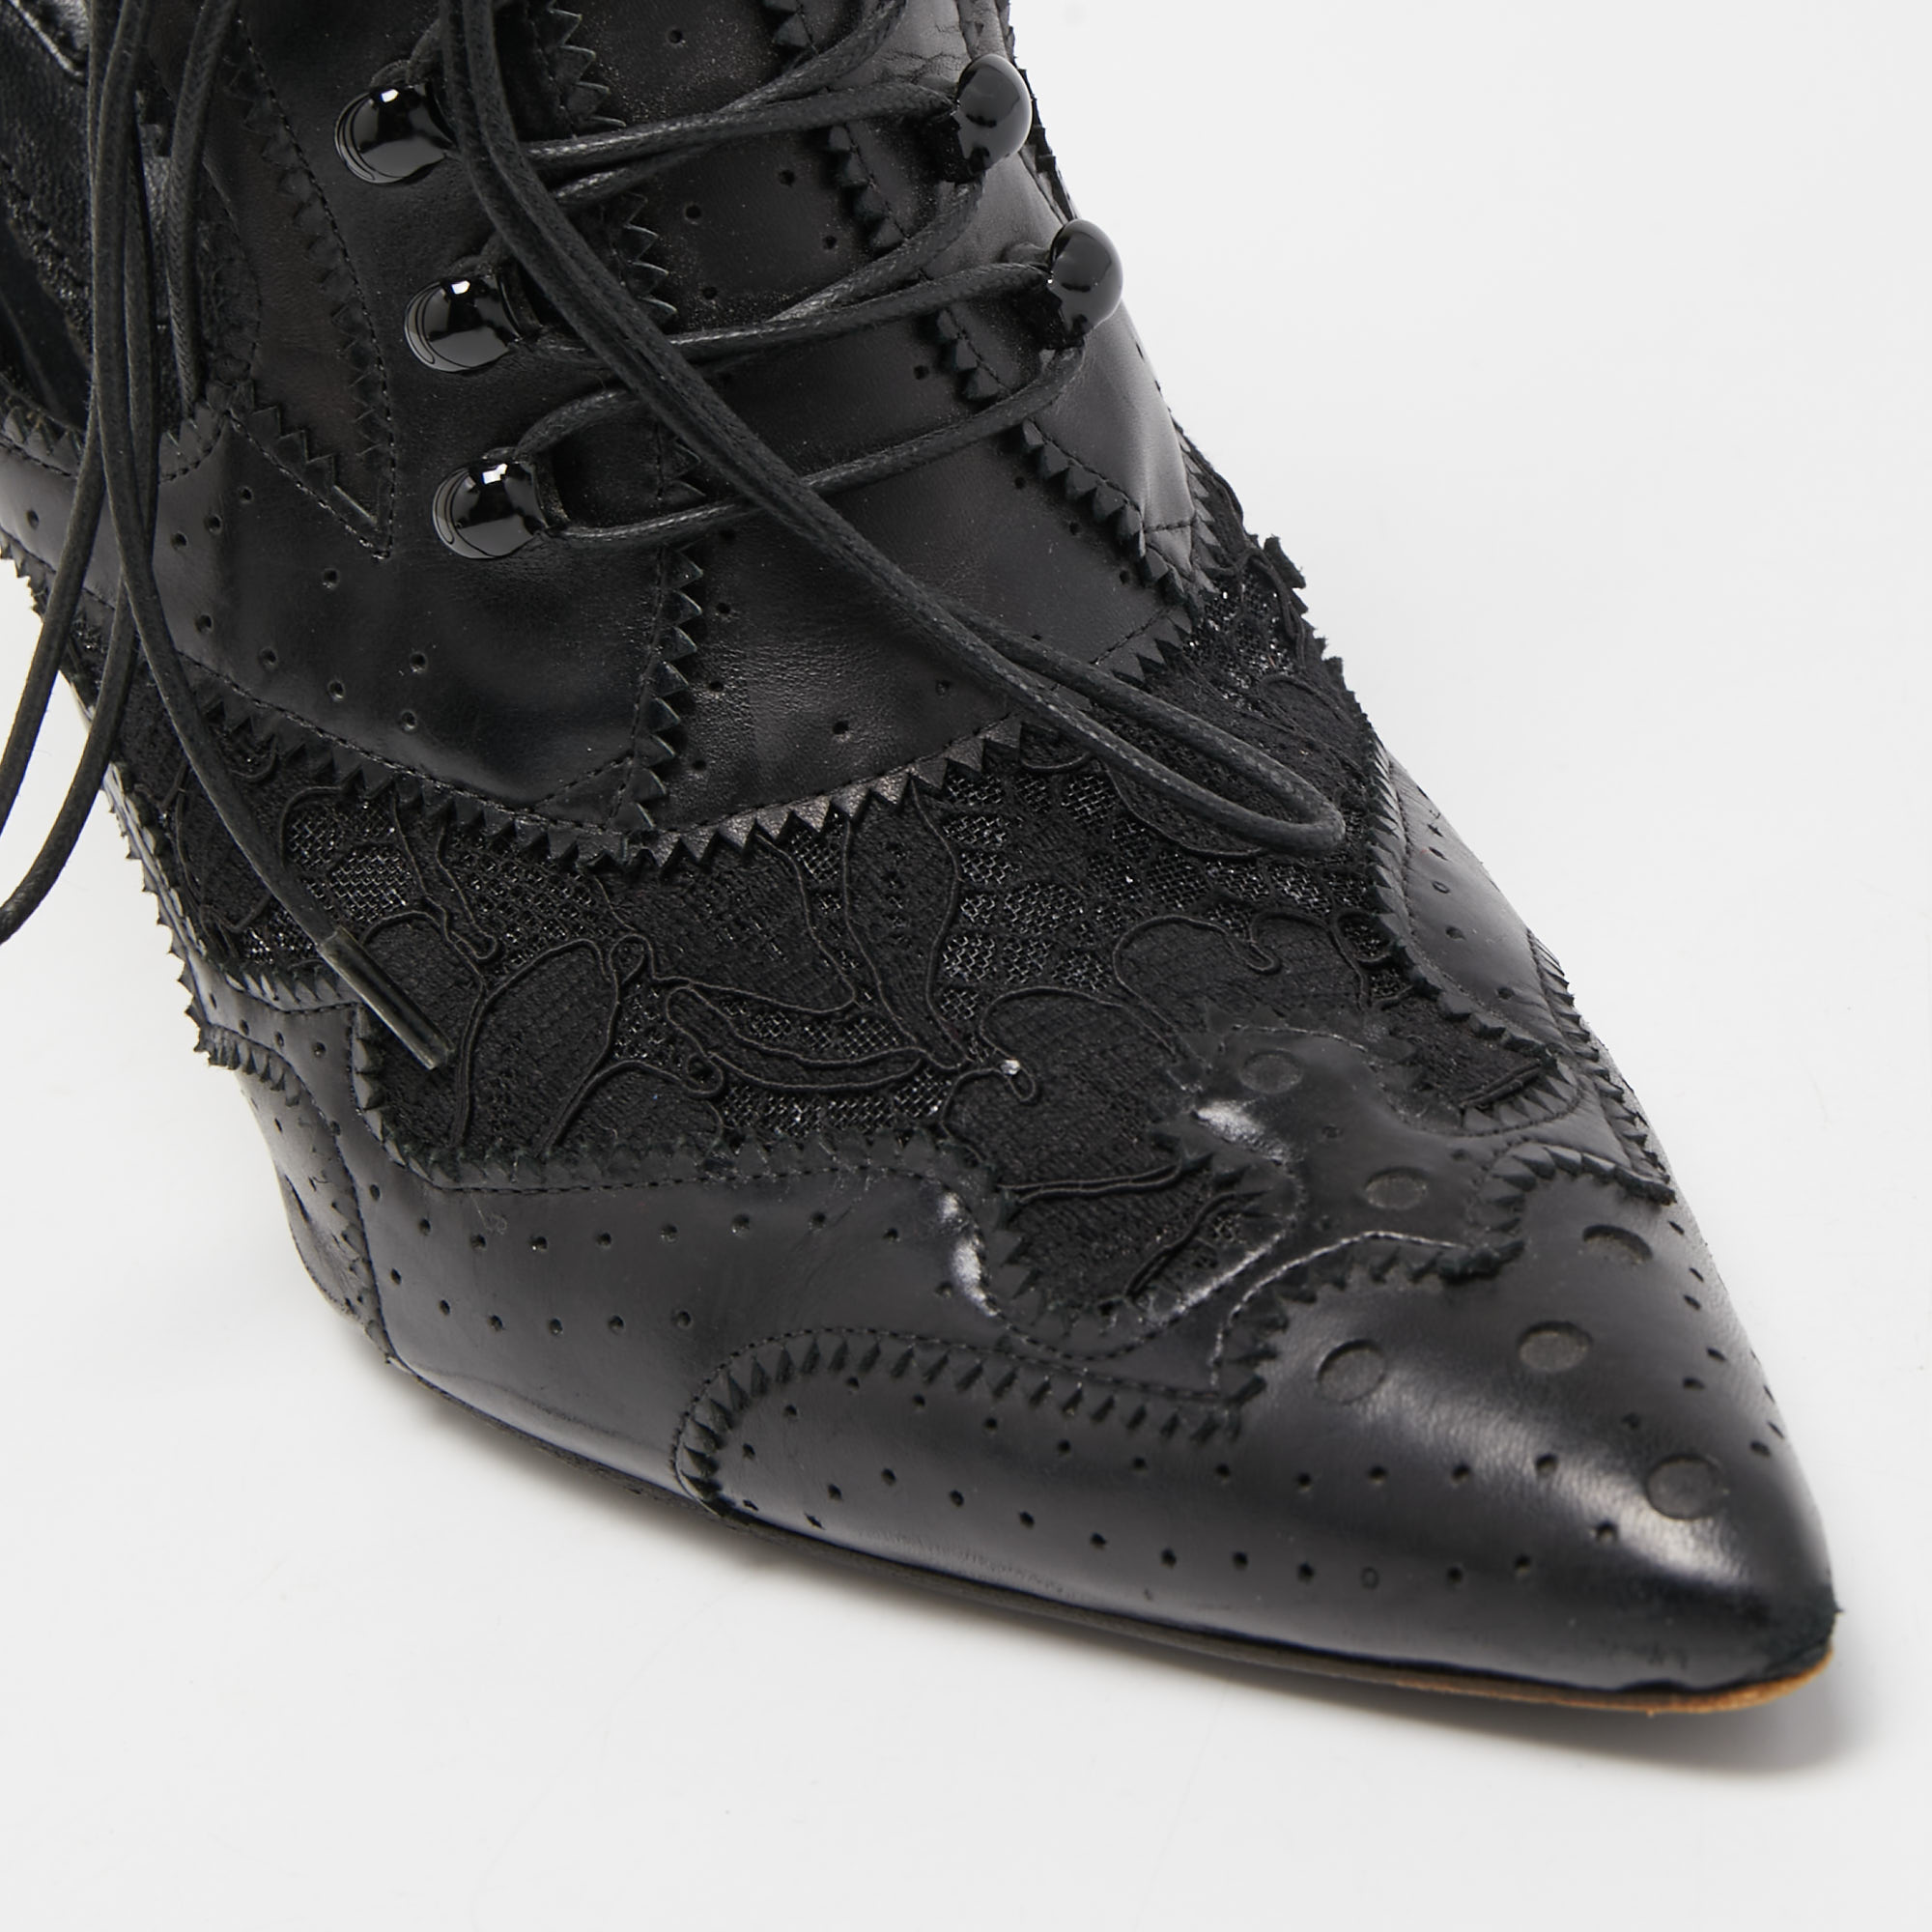 Givenchy Black Leather And Lace Pointed Toe Ankle Booties Size 39